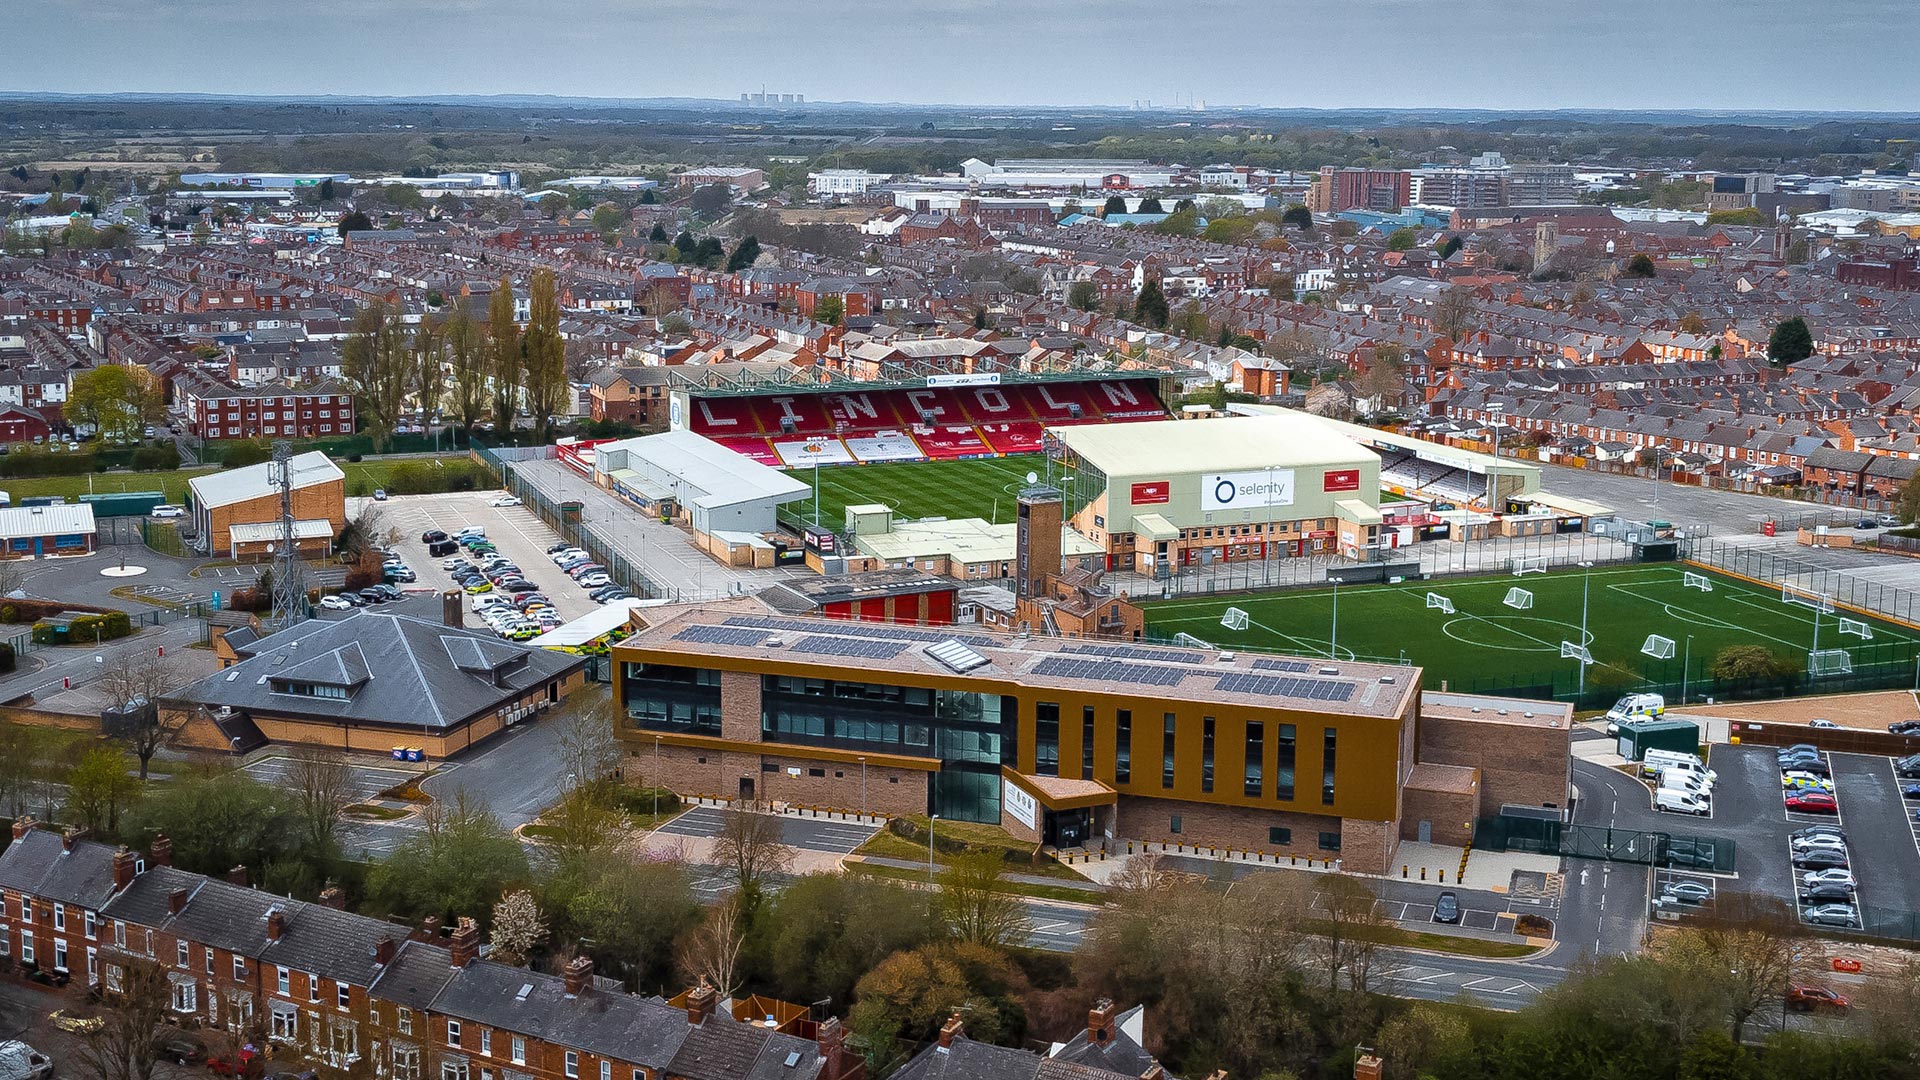 Lincoln City to welcome fans back to Sincil Bank for Sunderland match